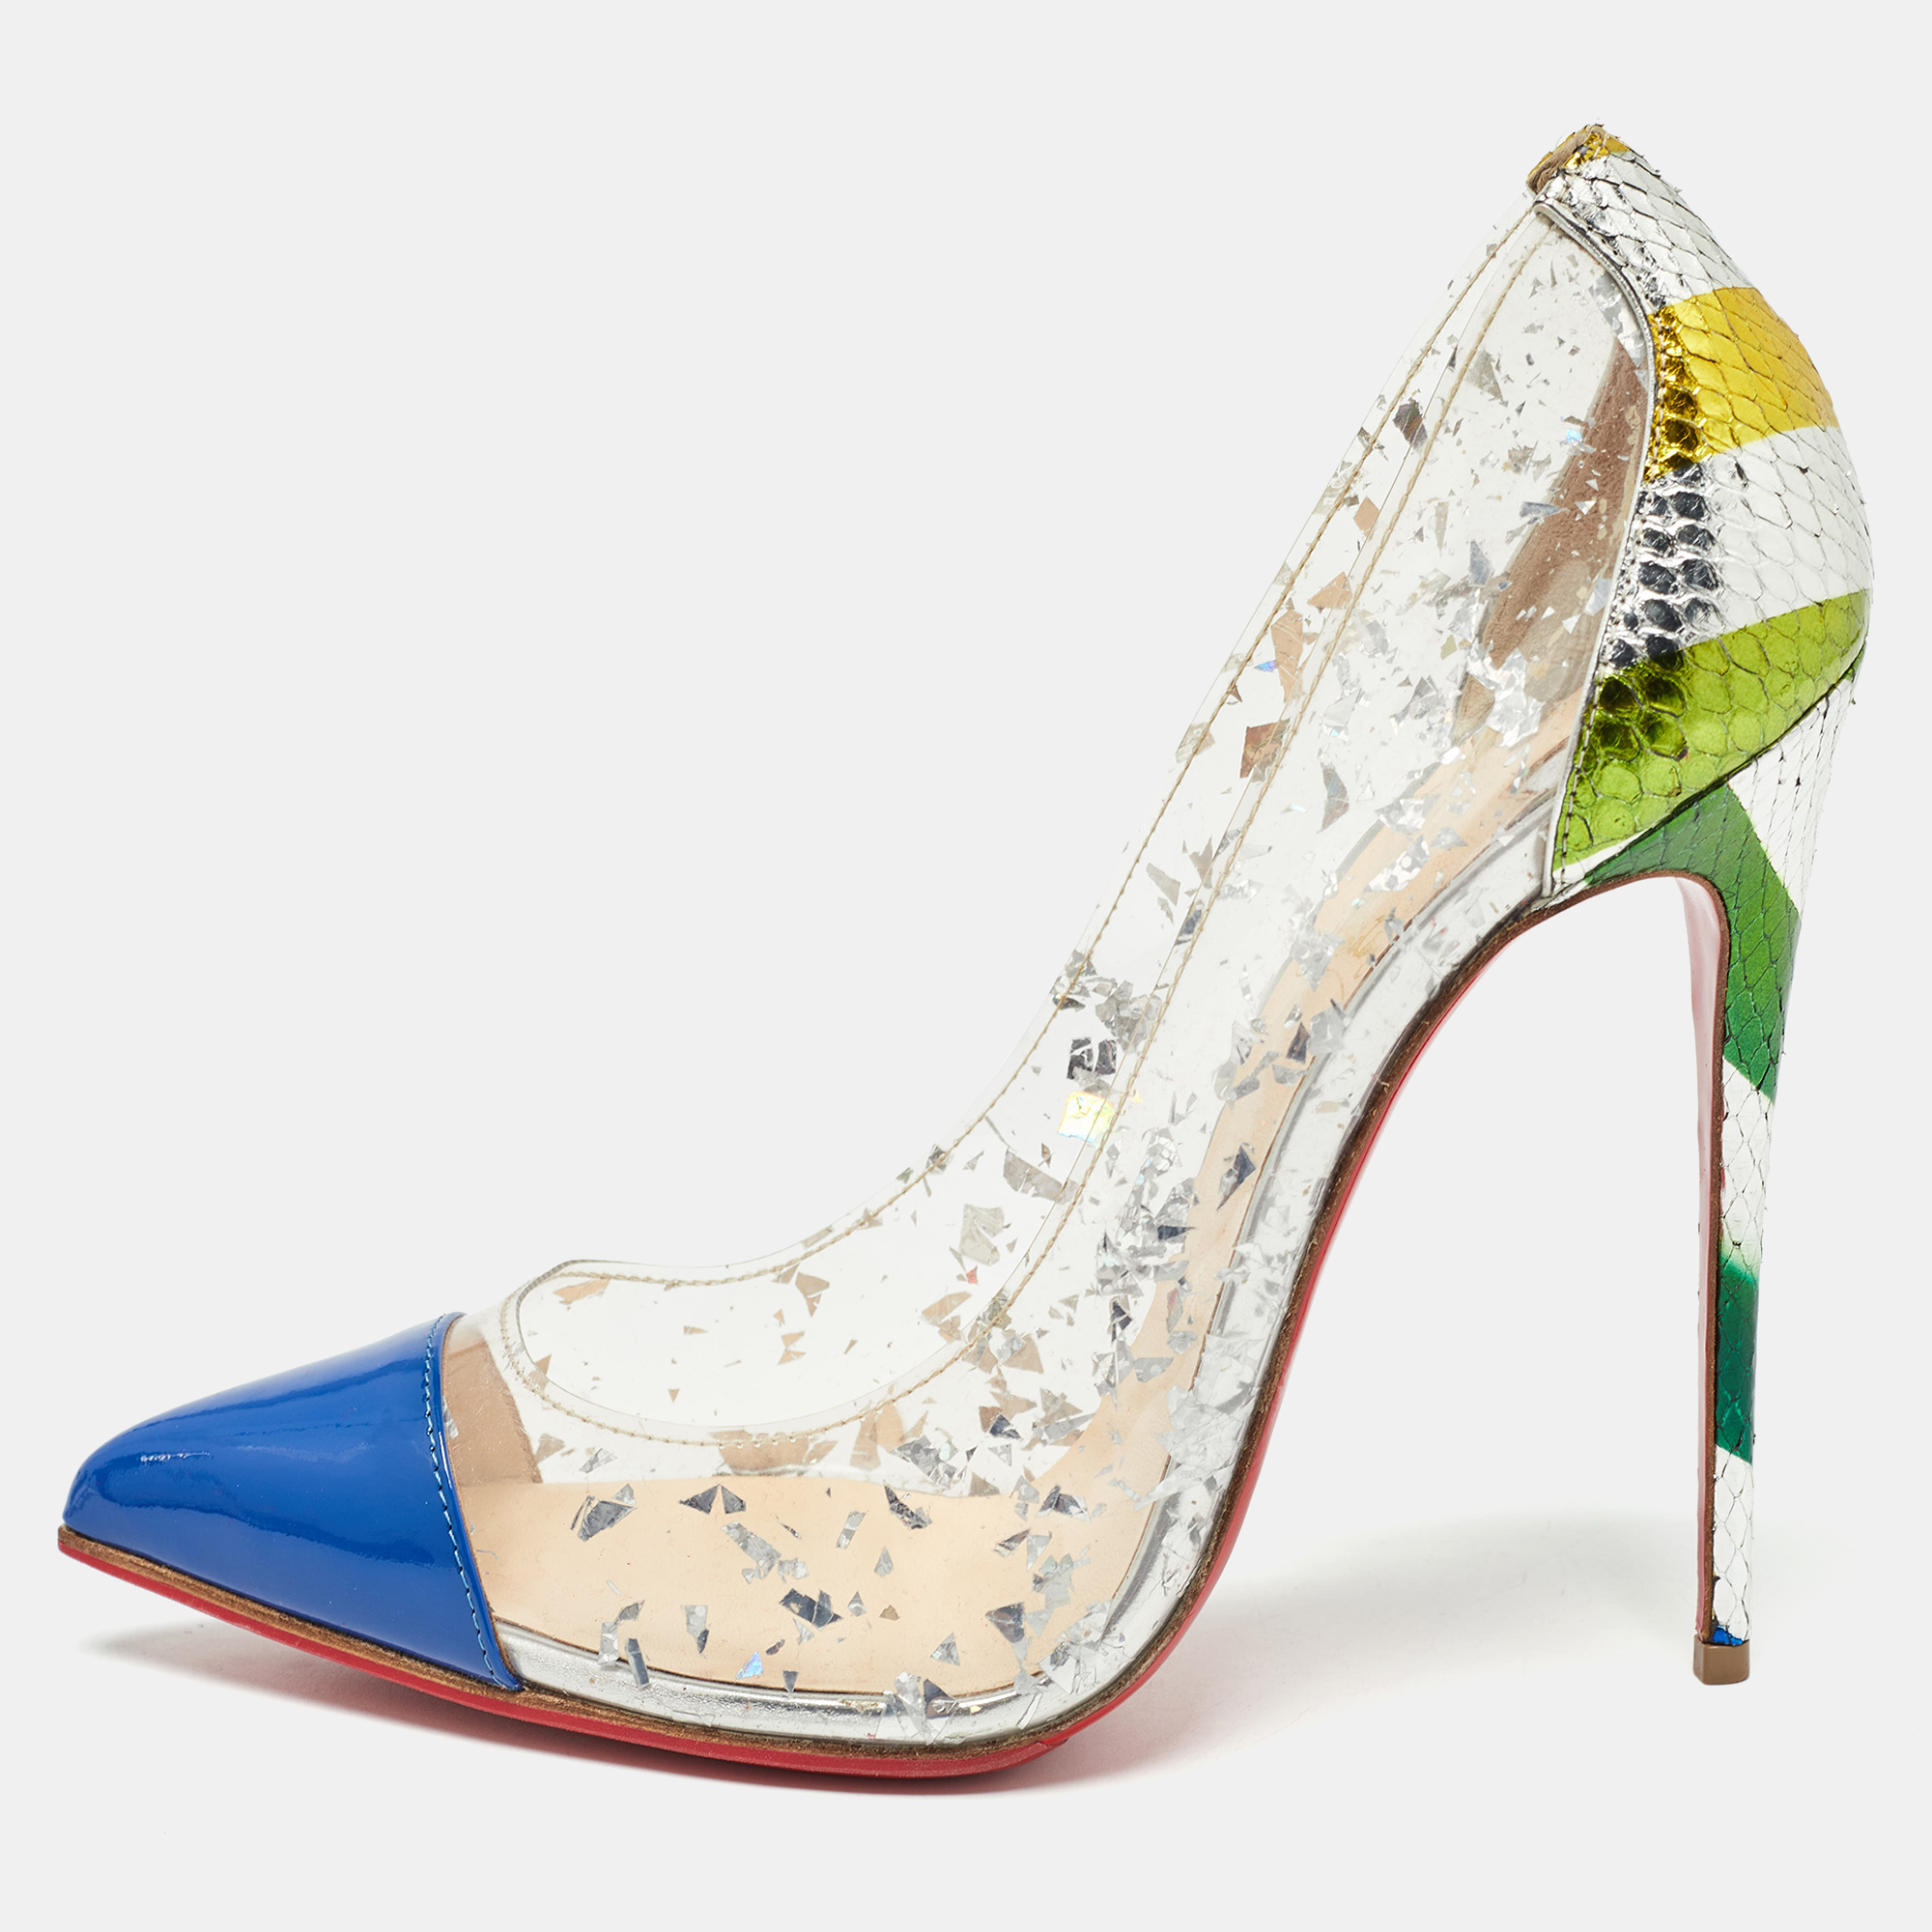 Christian louboutin multicolor embossed snakeskin, patent and pvc debout pumps size 40